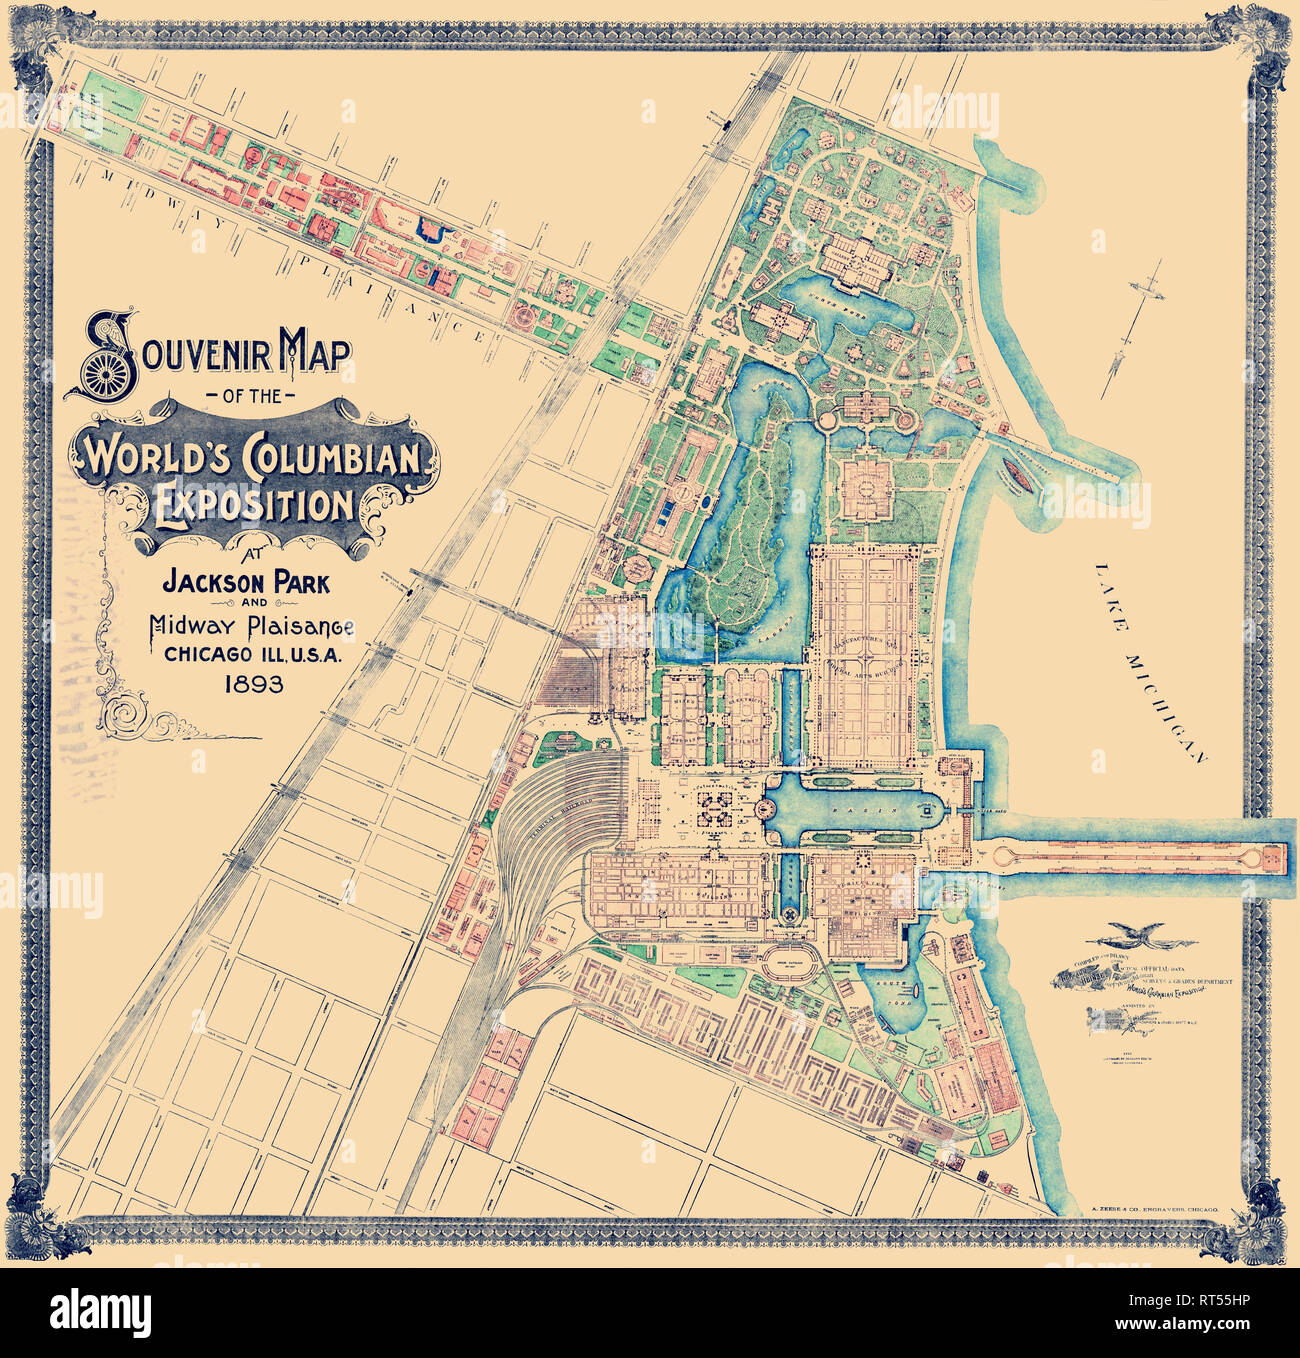 Map of the World's Columbian Exposition at Jackson Park and Midway Plaisance, Chicago, Illinois, 1893. Stock Photo